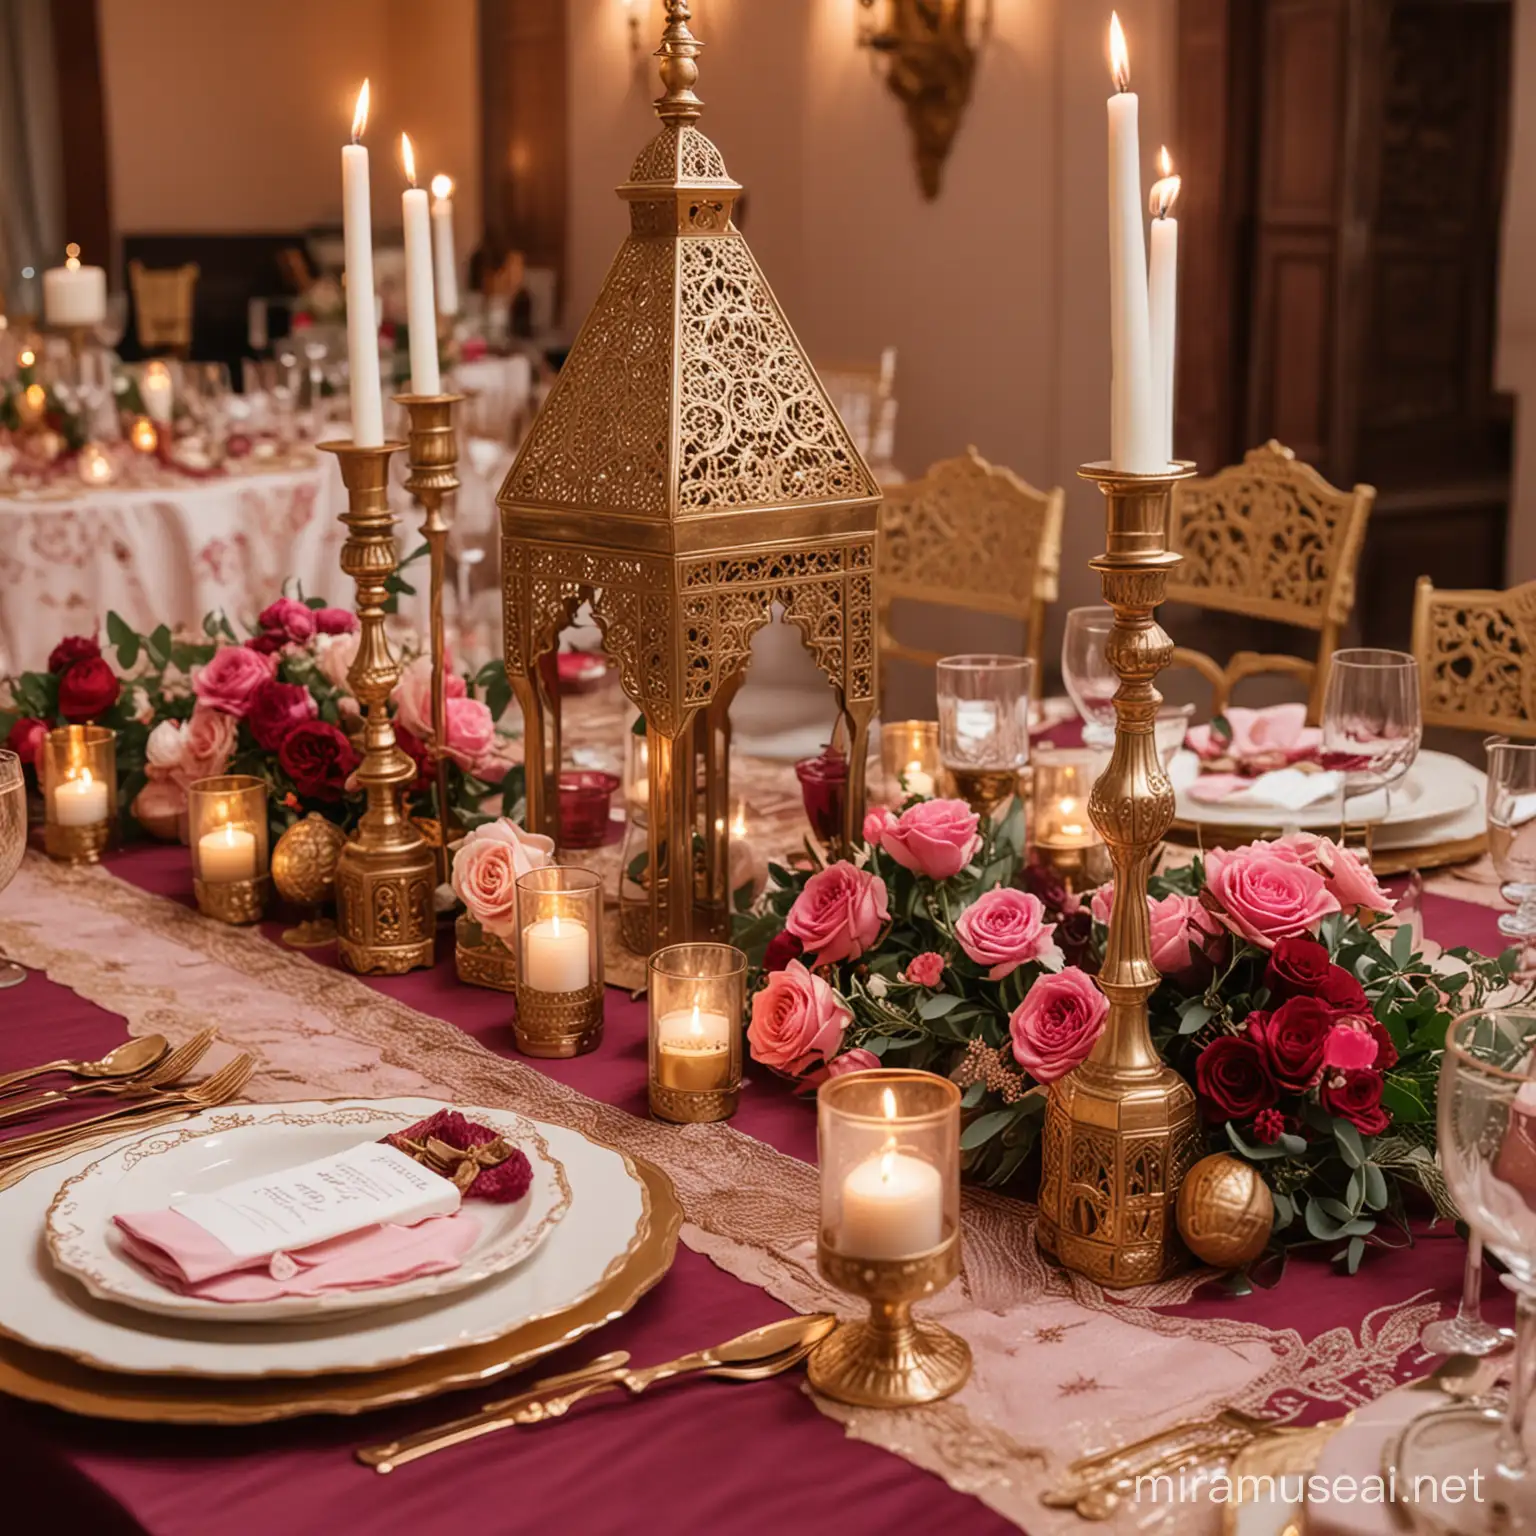 OrientalInspired Marrakech Wedding Reception in Muted Pink and Burgundy with Gold Accents